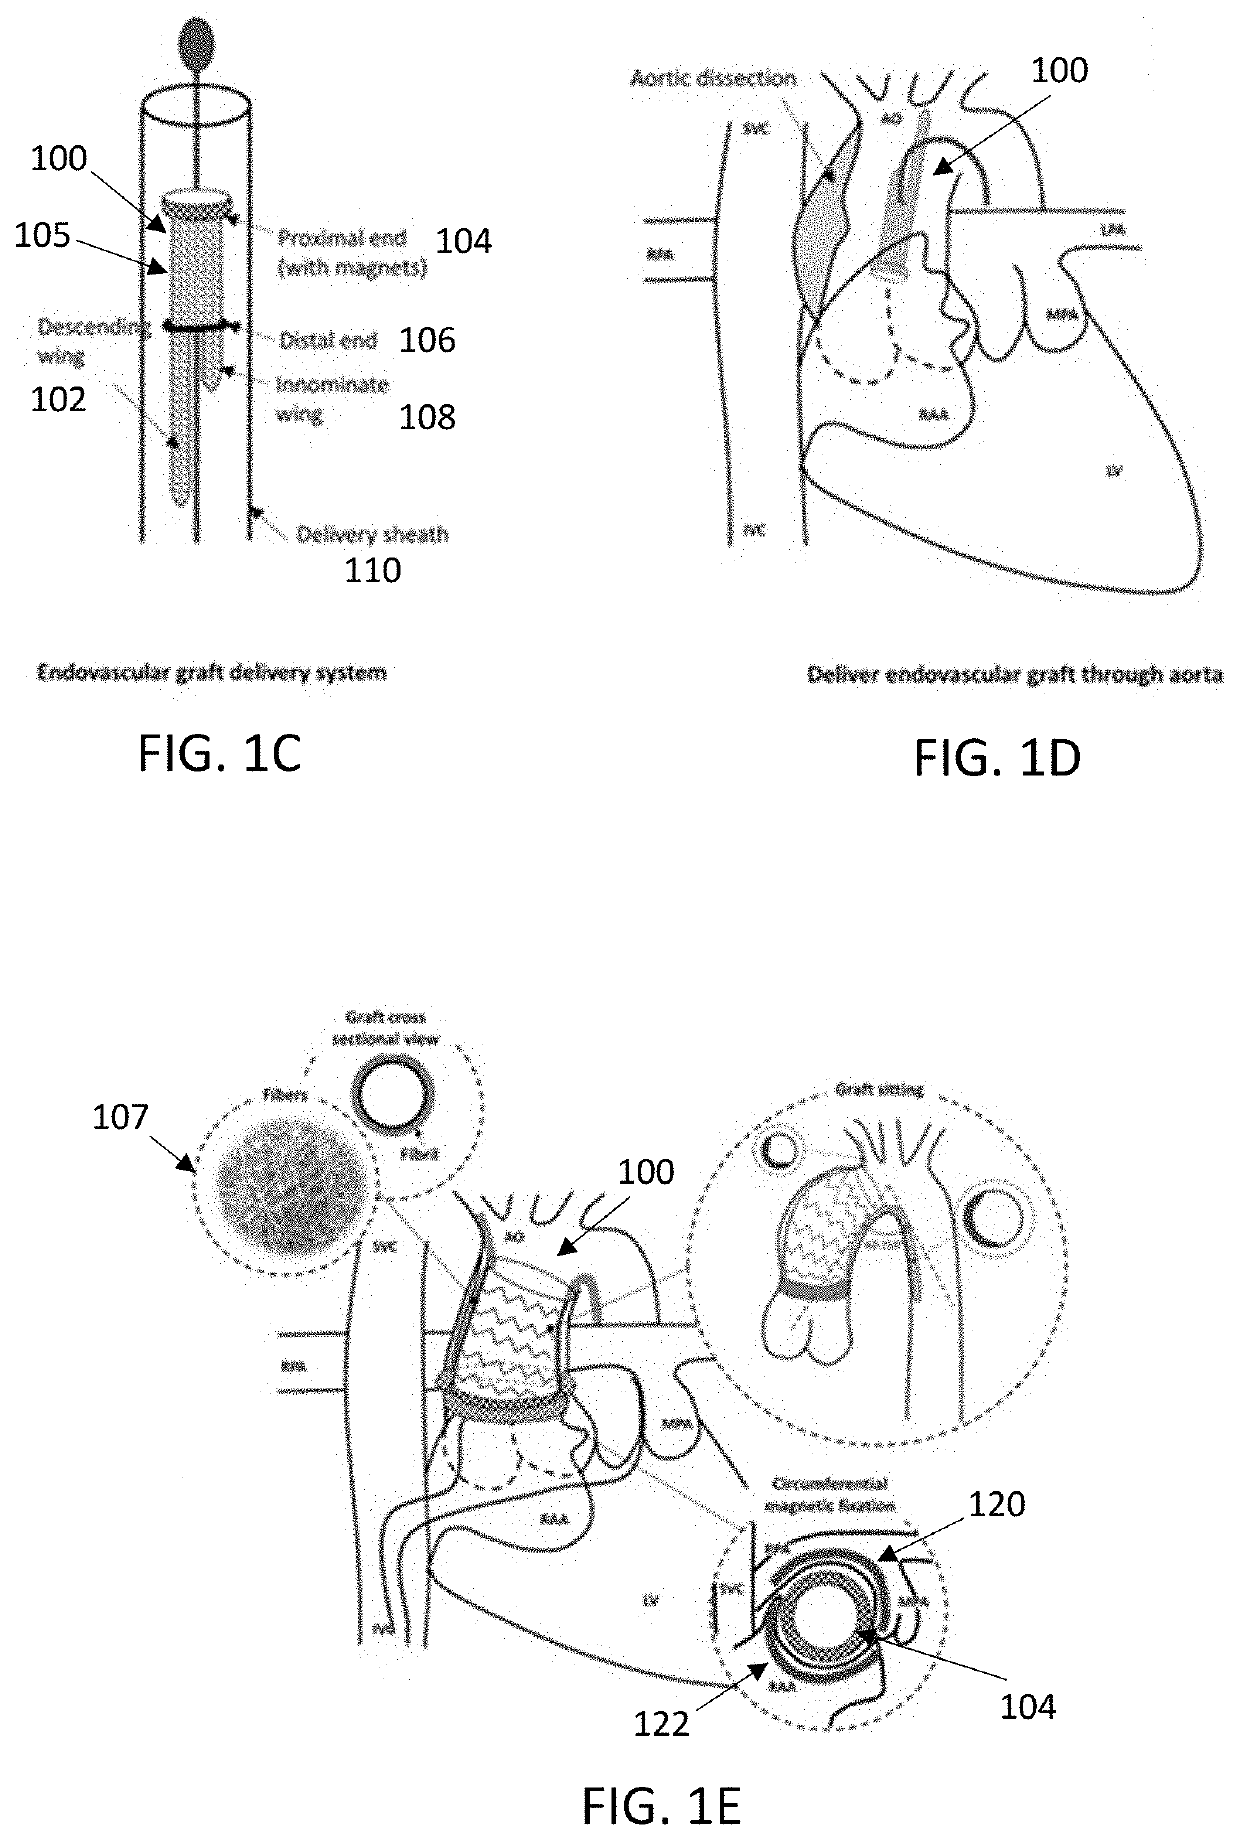 Transcatheter device, system and method for treating type a aortic dissection